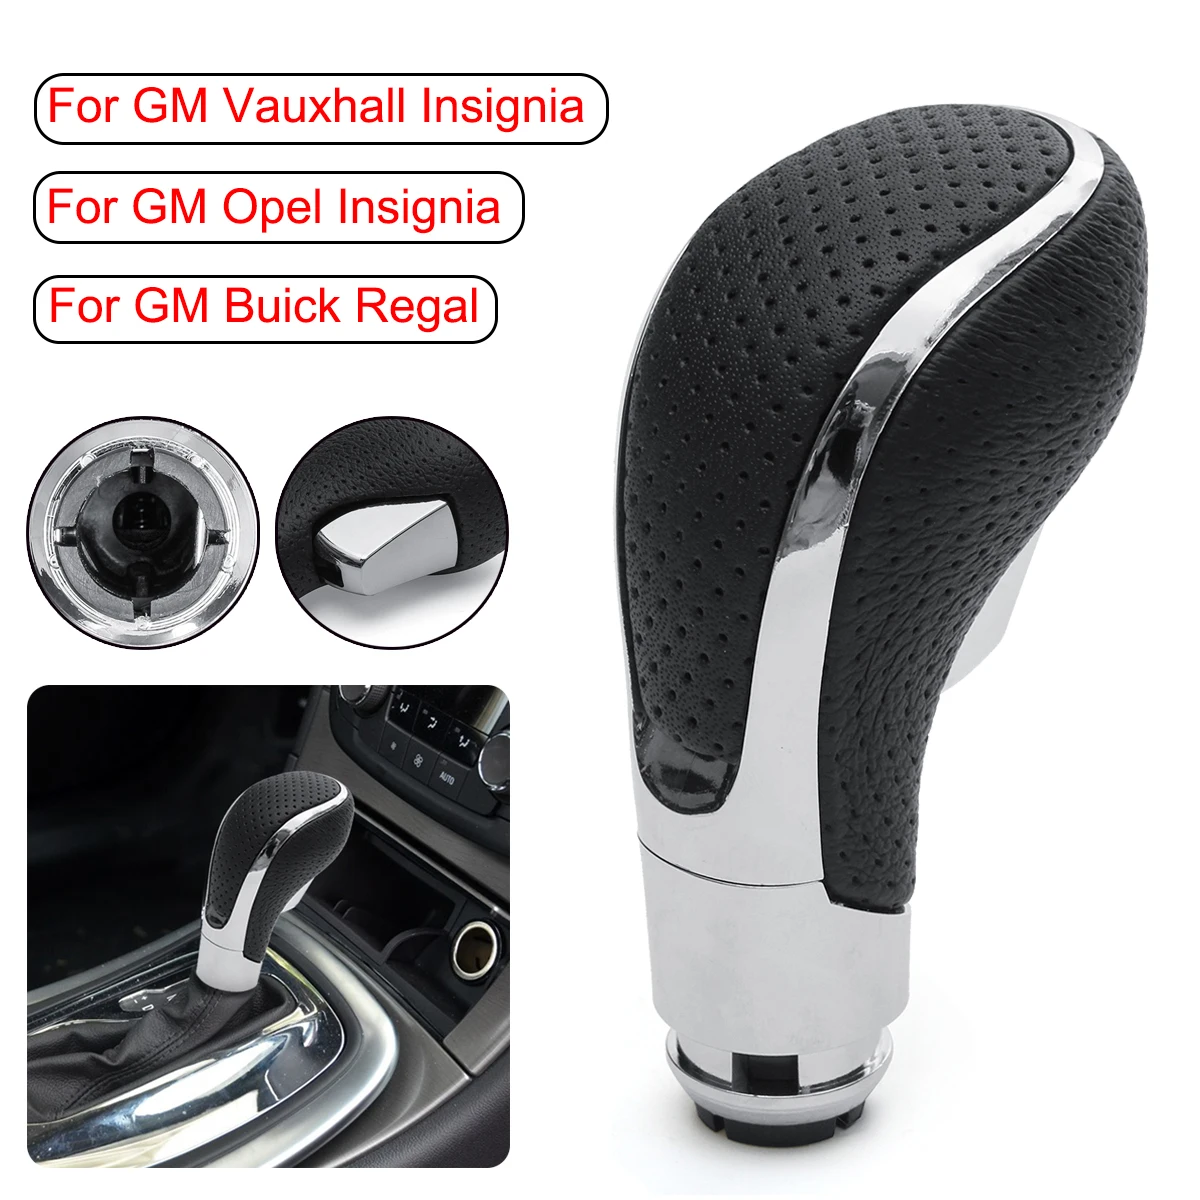 Gear Shifter Lever Shift Knob Automatic Transmission PU Leather For Buick Regal